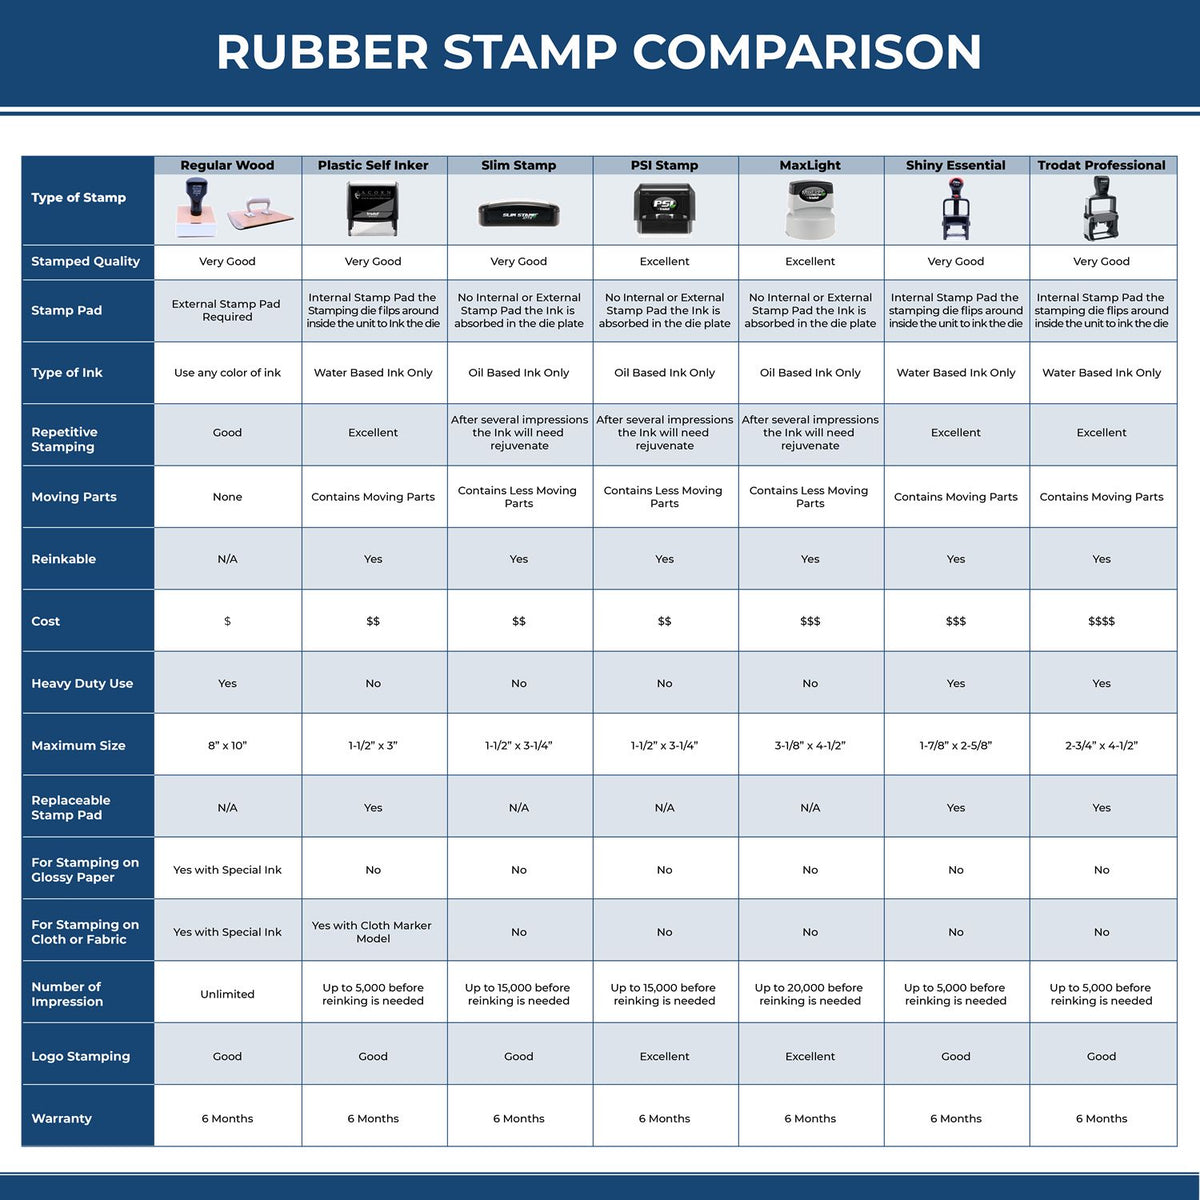 Large Self-Inking Anulado Stamp 5545S Rubber Stamp Comparison